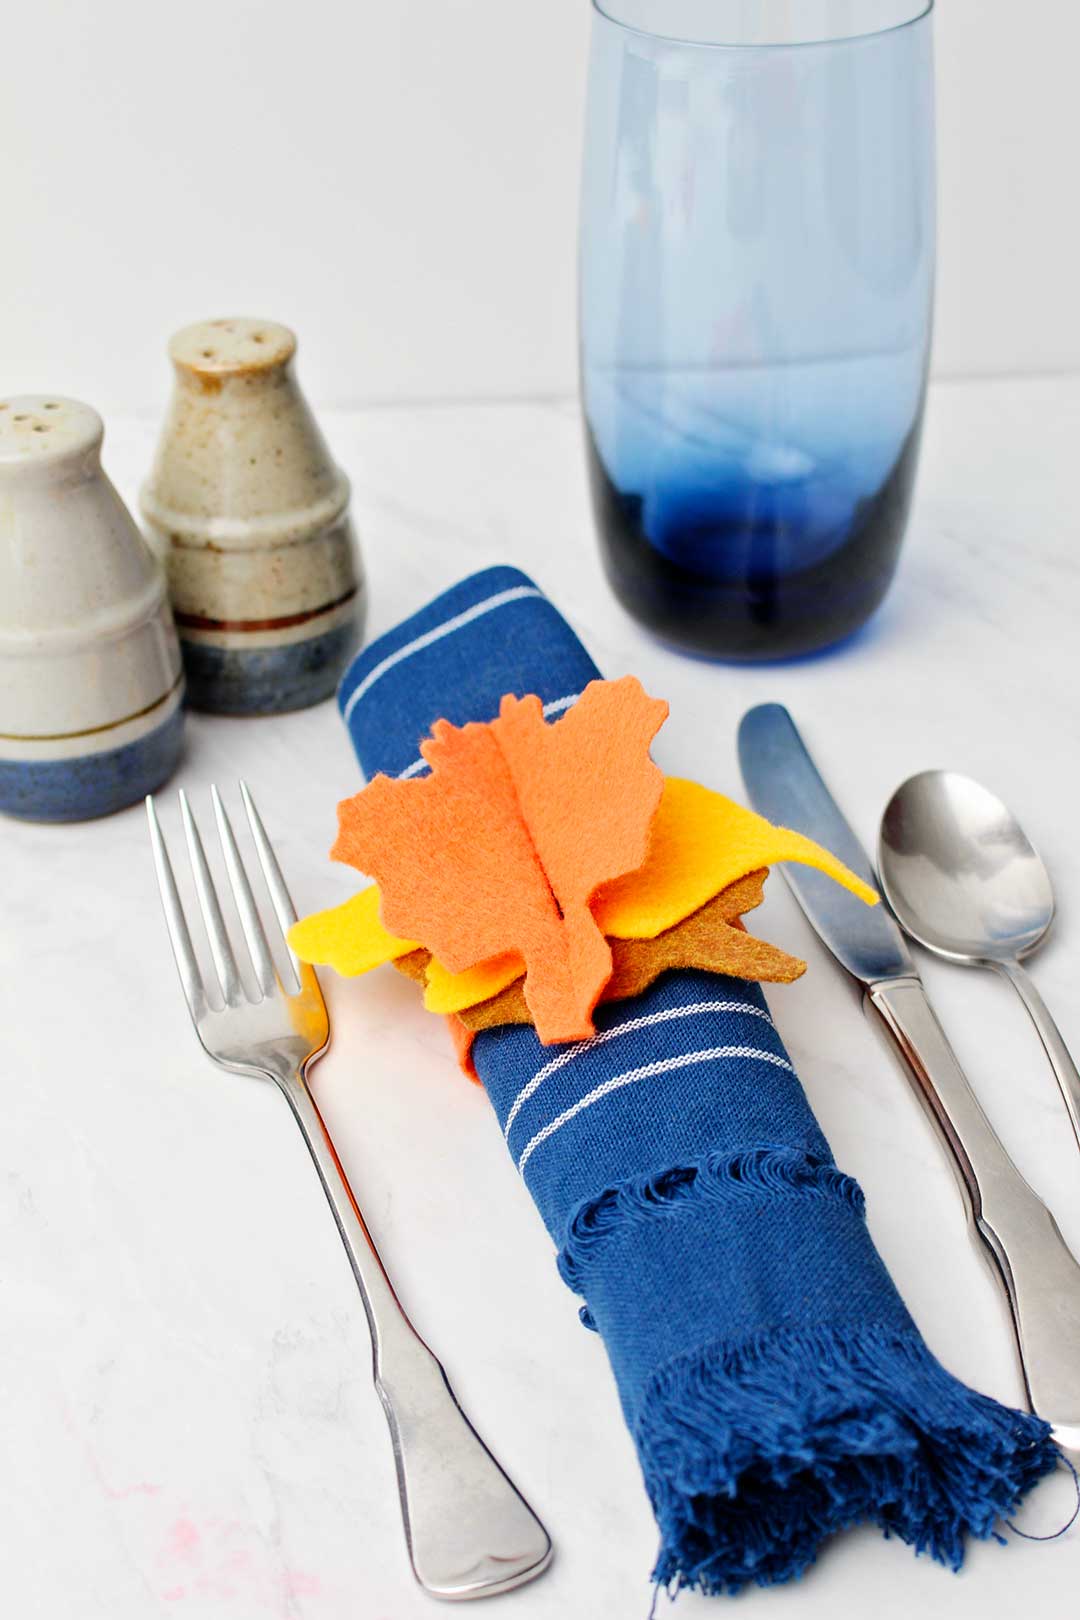 Completed Felt Thanksgiving Napkin Ring on a dark blue napkin with place setting.